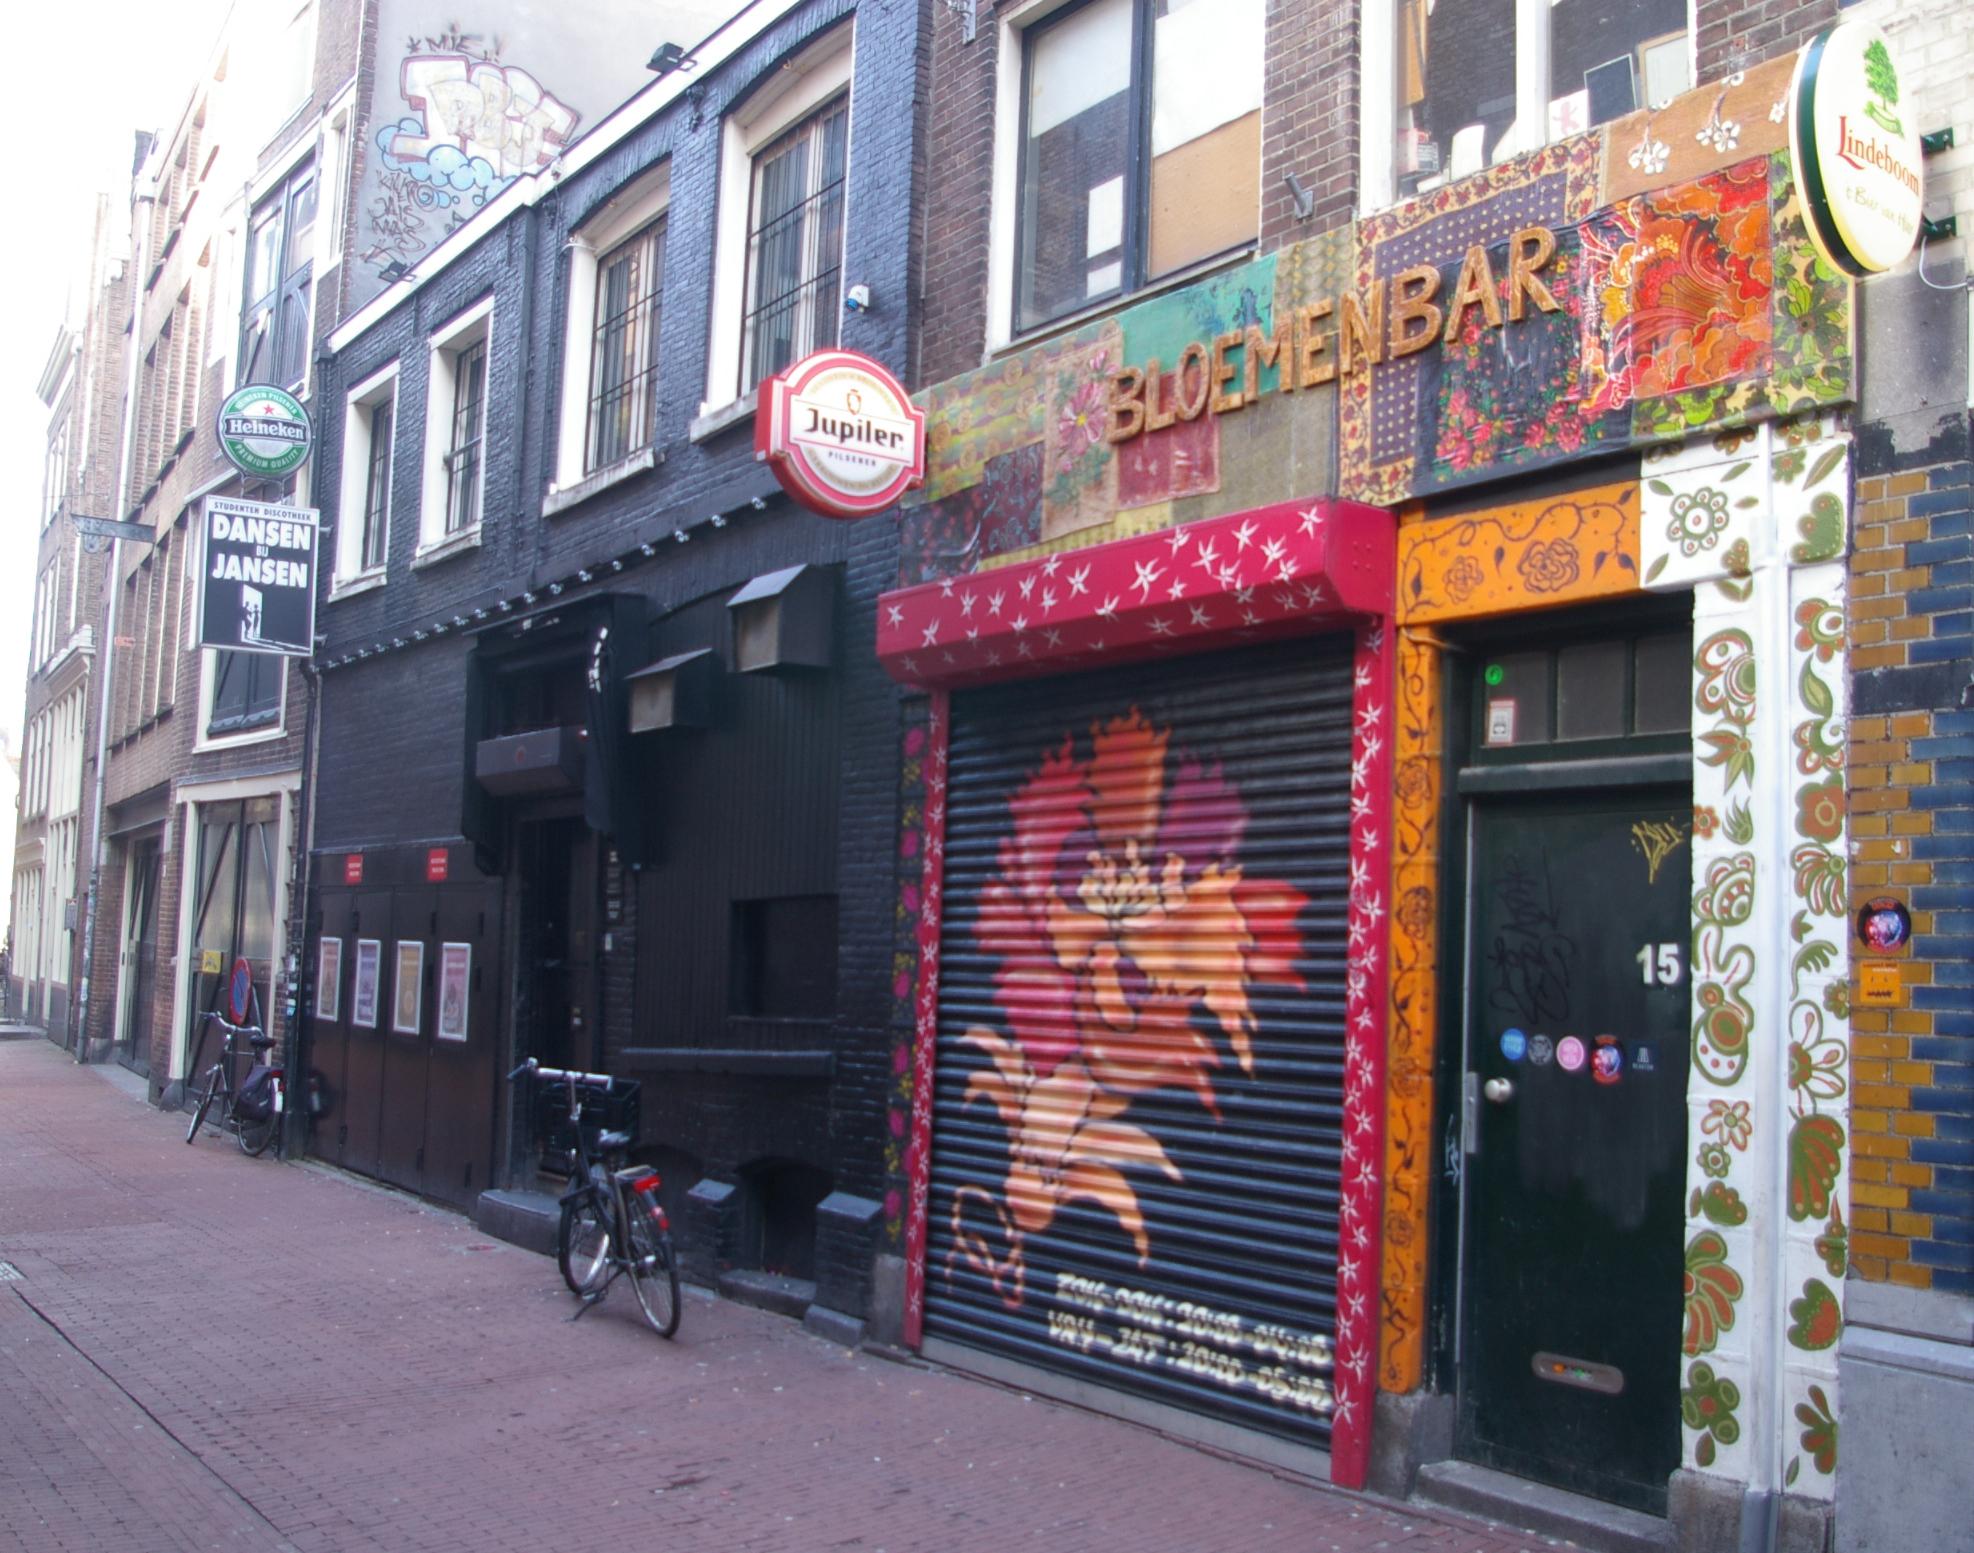 Cover image of this place Bloemenbar